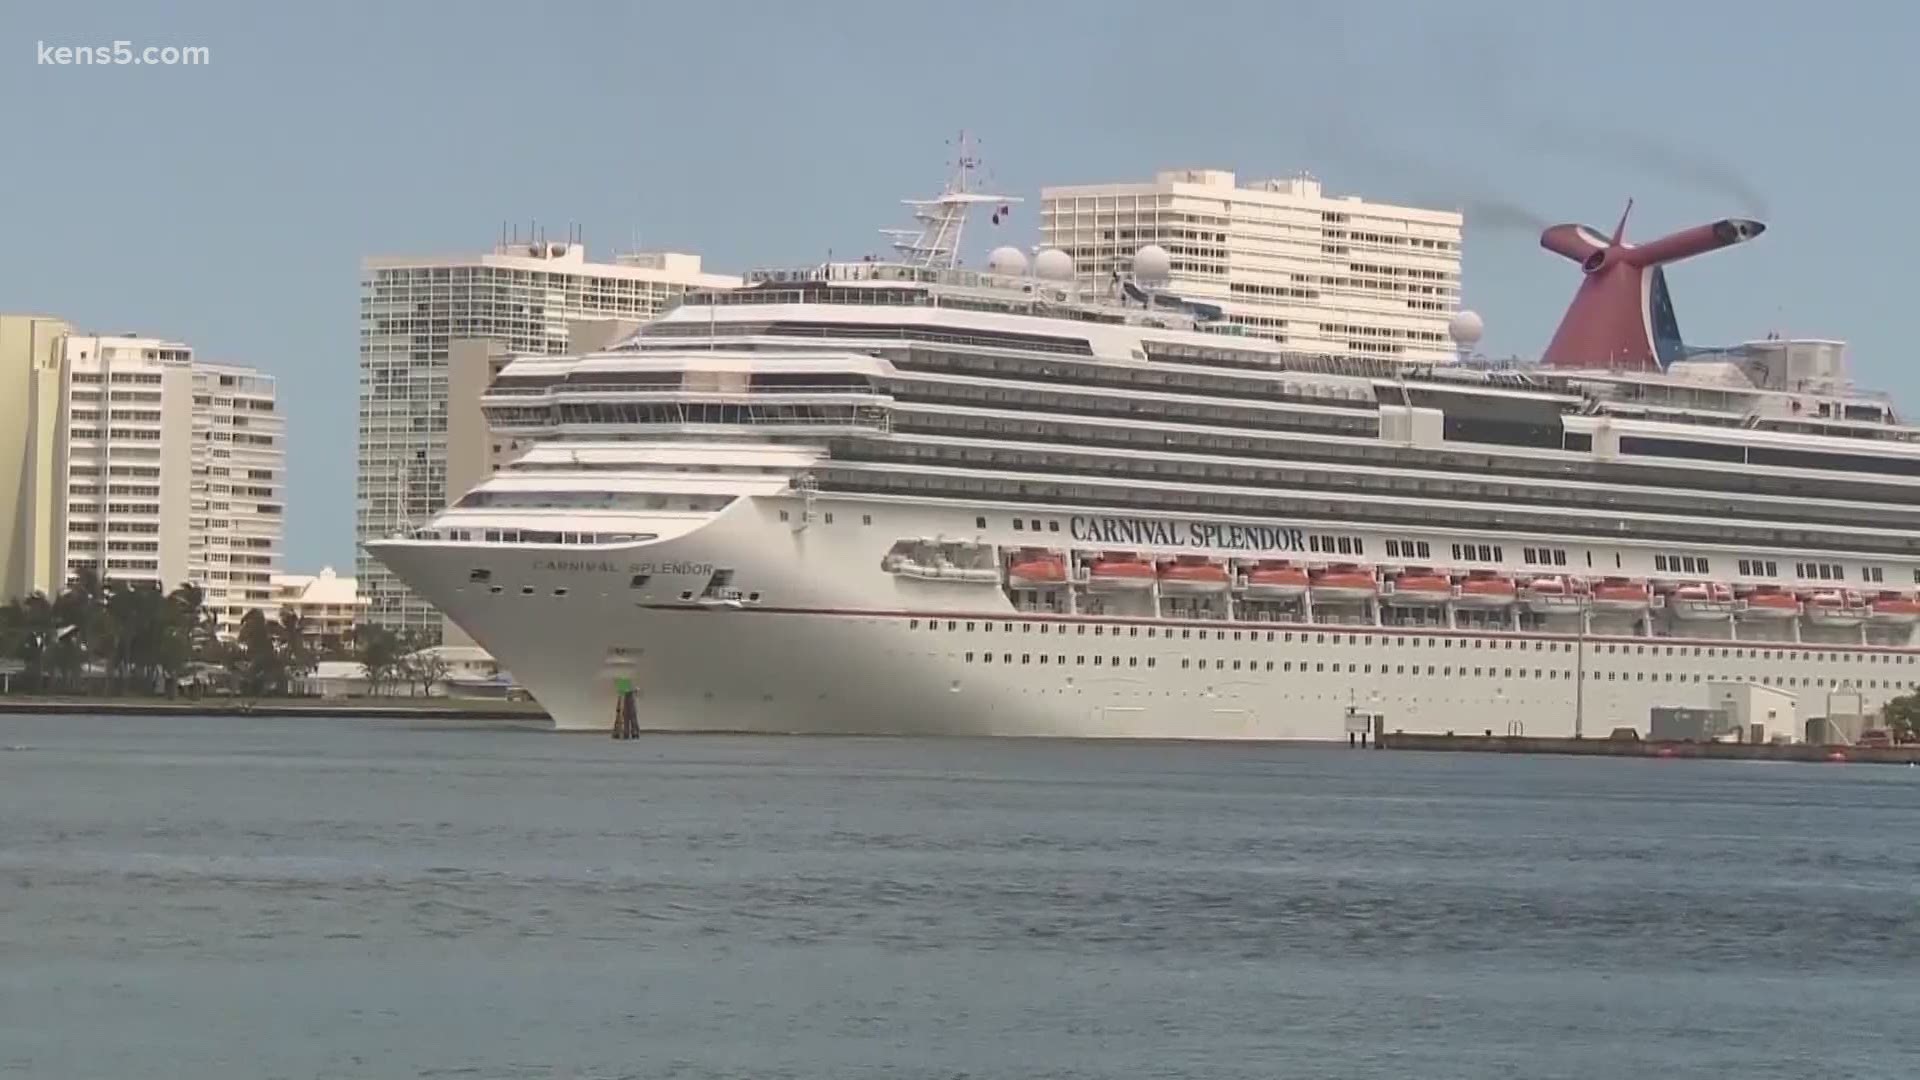 Major cruise lines say they will test all passengers and crew for COVID-19 prior to boarding as part of their plan for resuming sailing in the Americas.